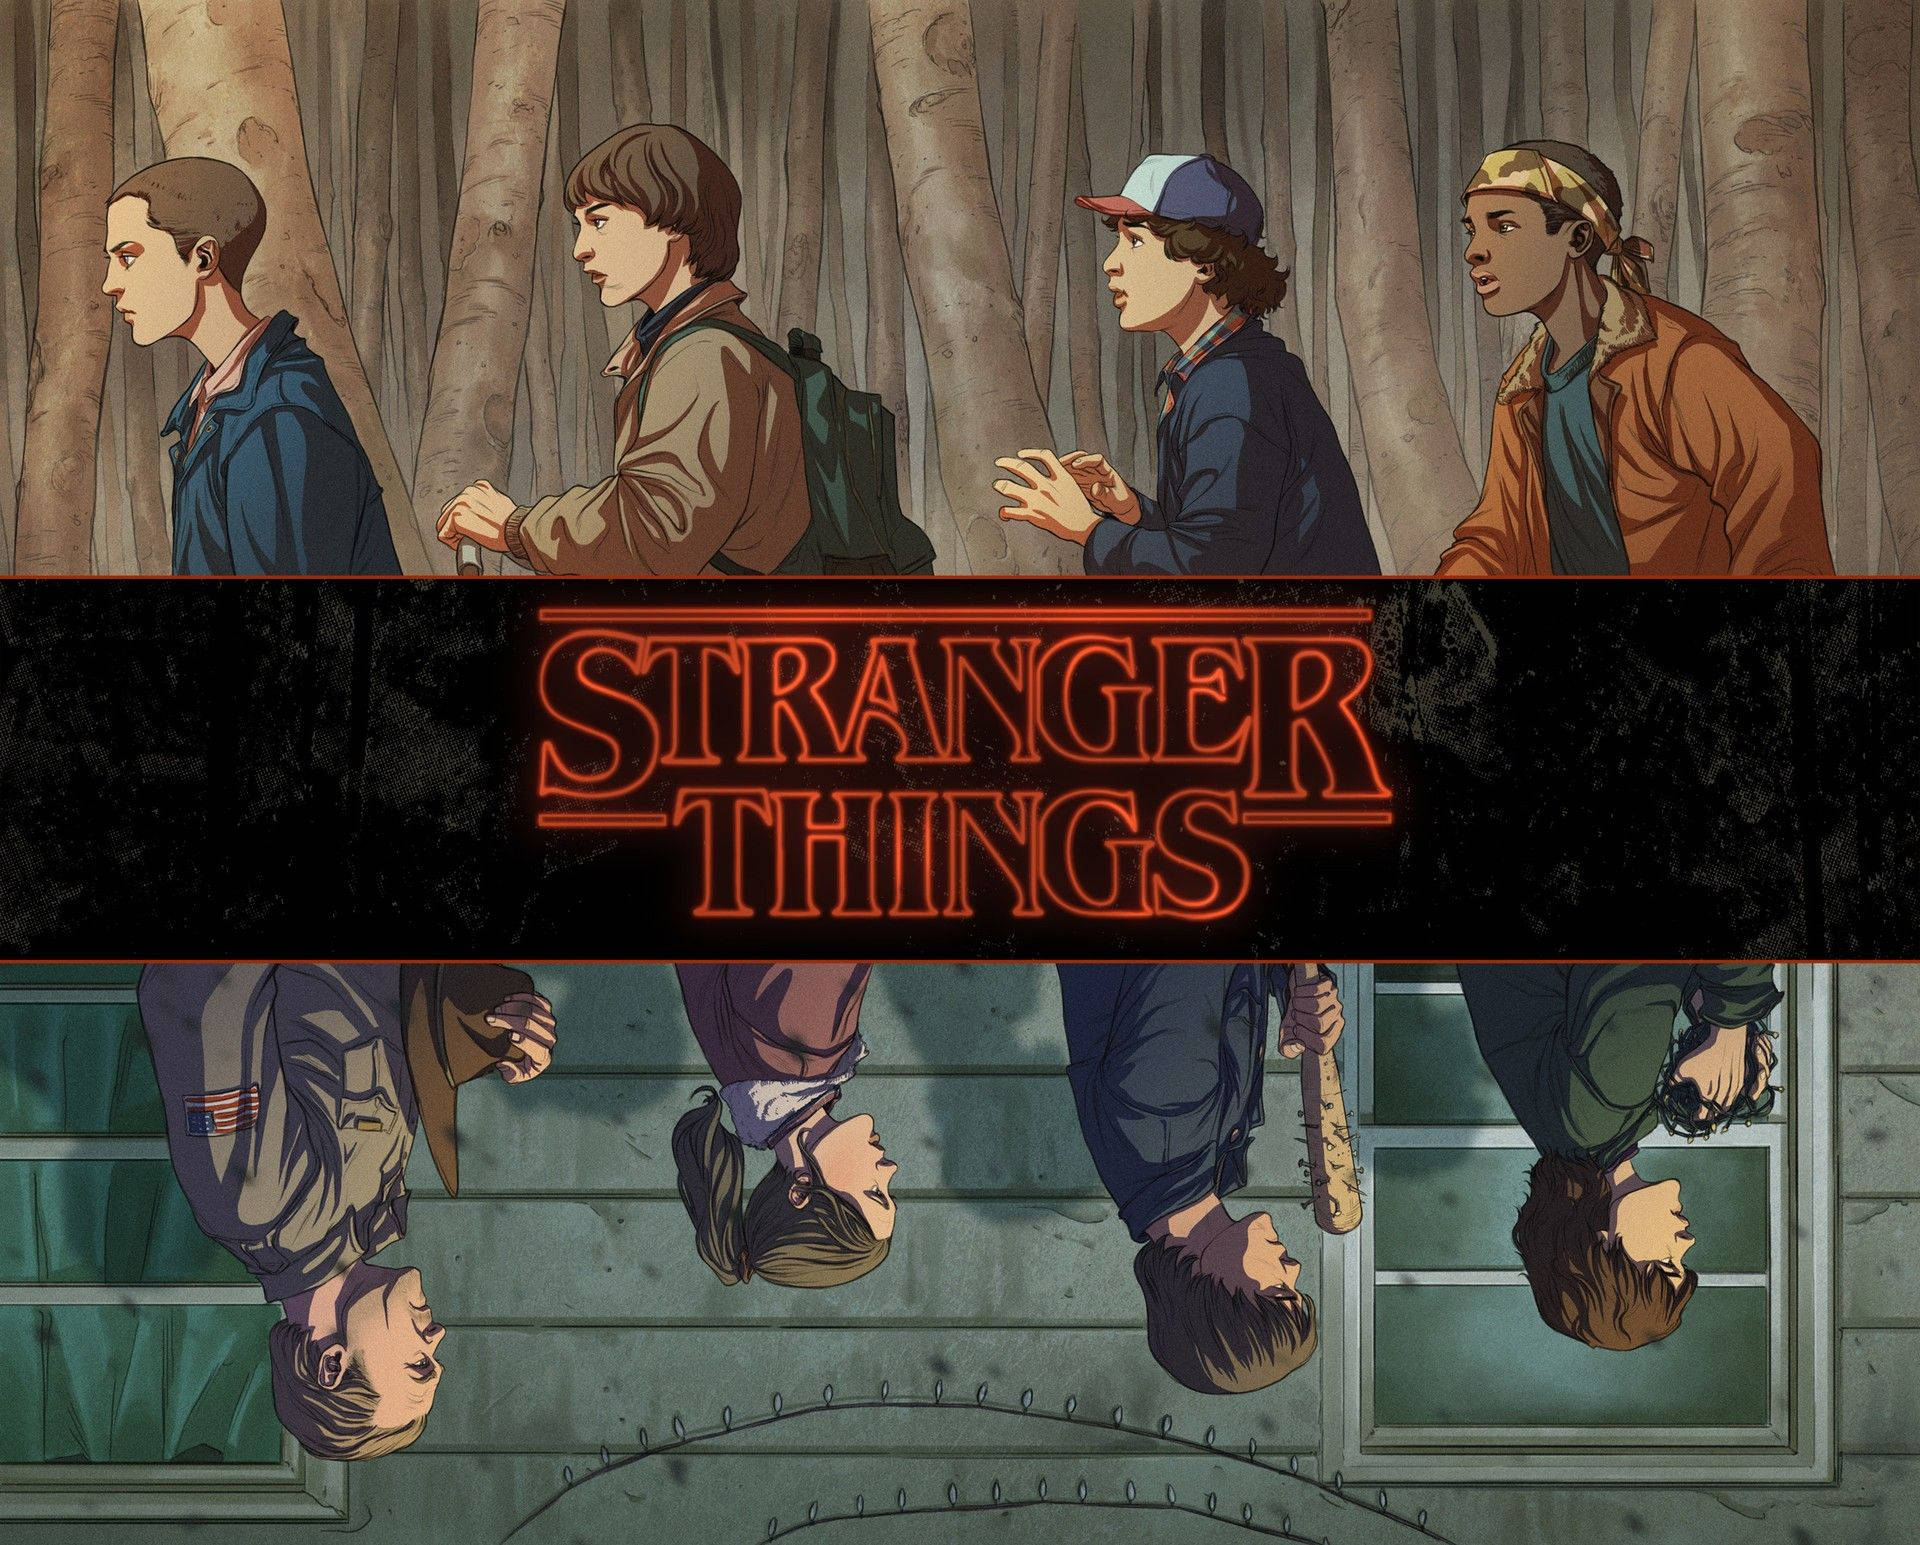 Download Upside Down Stranger Things Animated Poster Wallpaper | Wallpapers .com